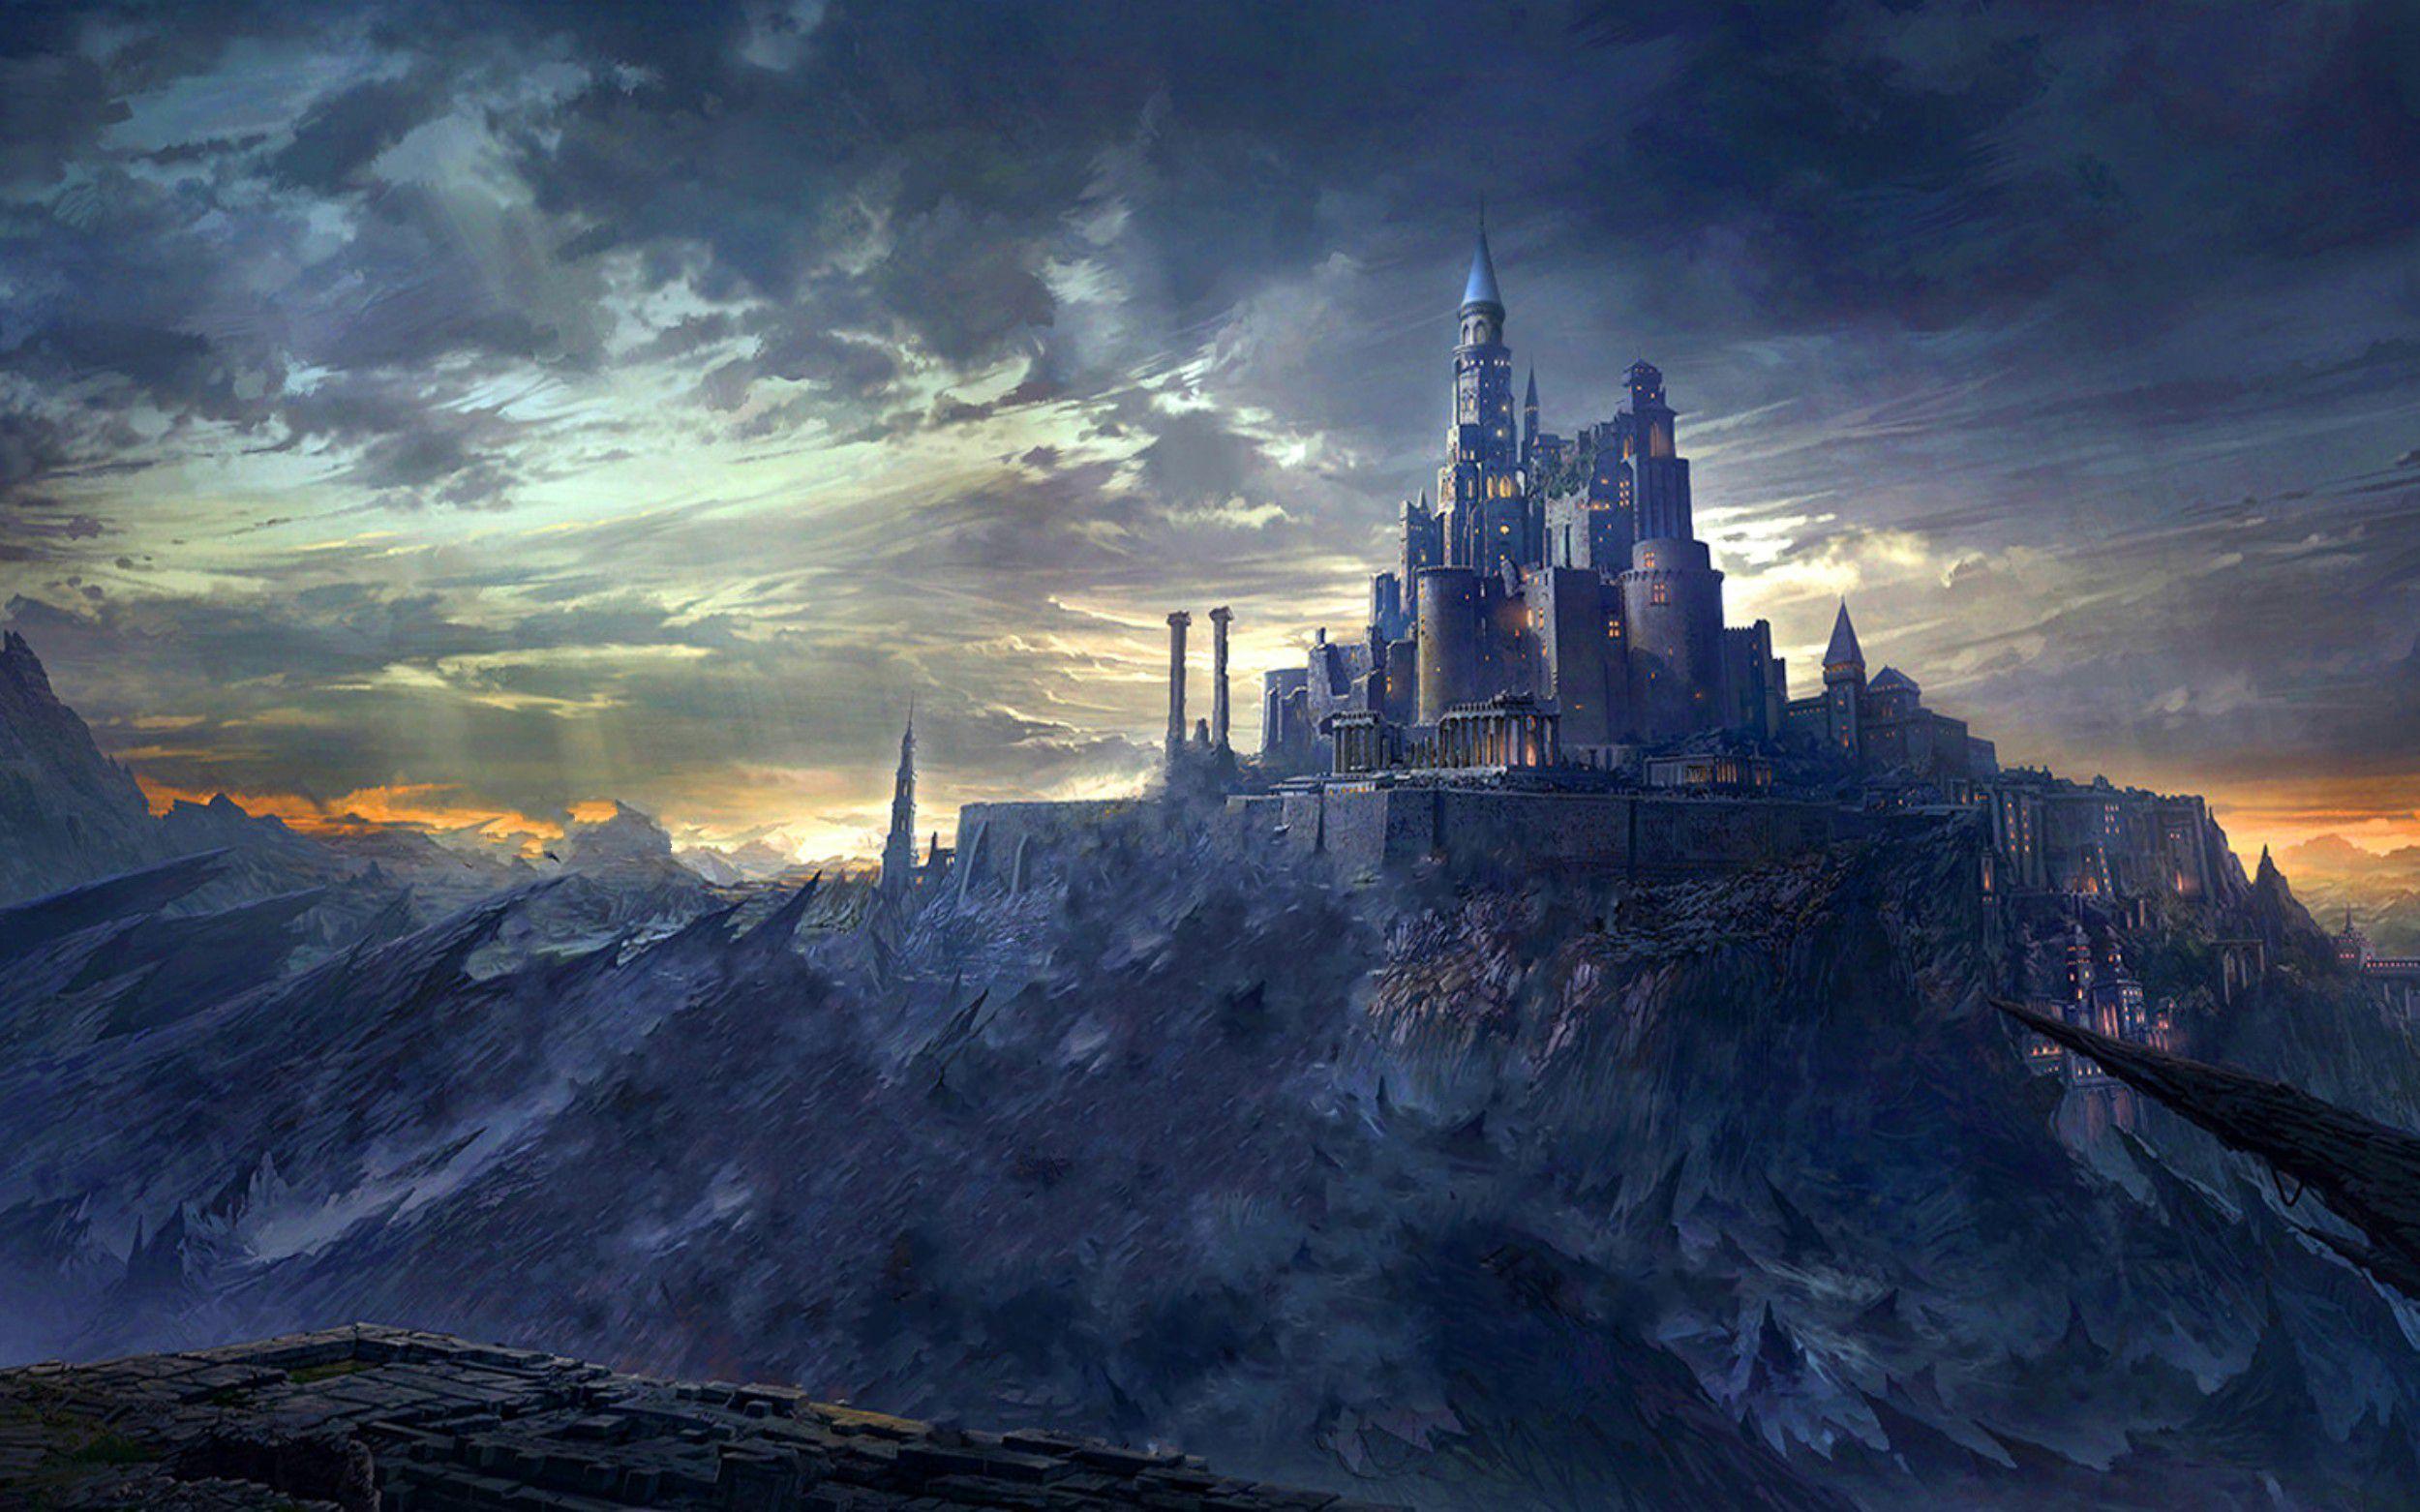 Image for Fantasy Mountain Castles Wallpaper Free HD. Study